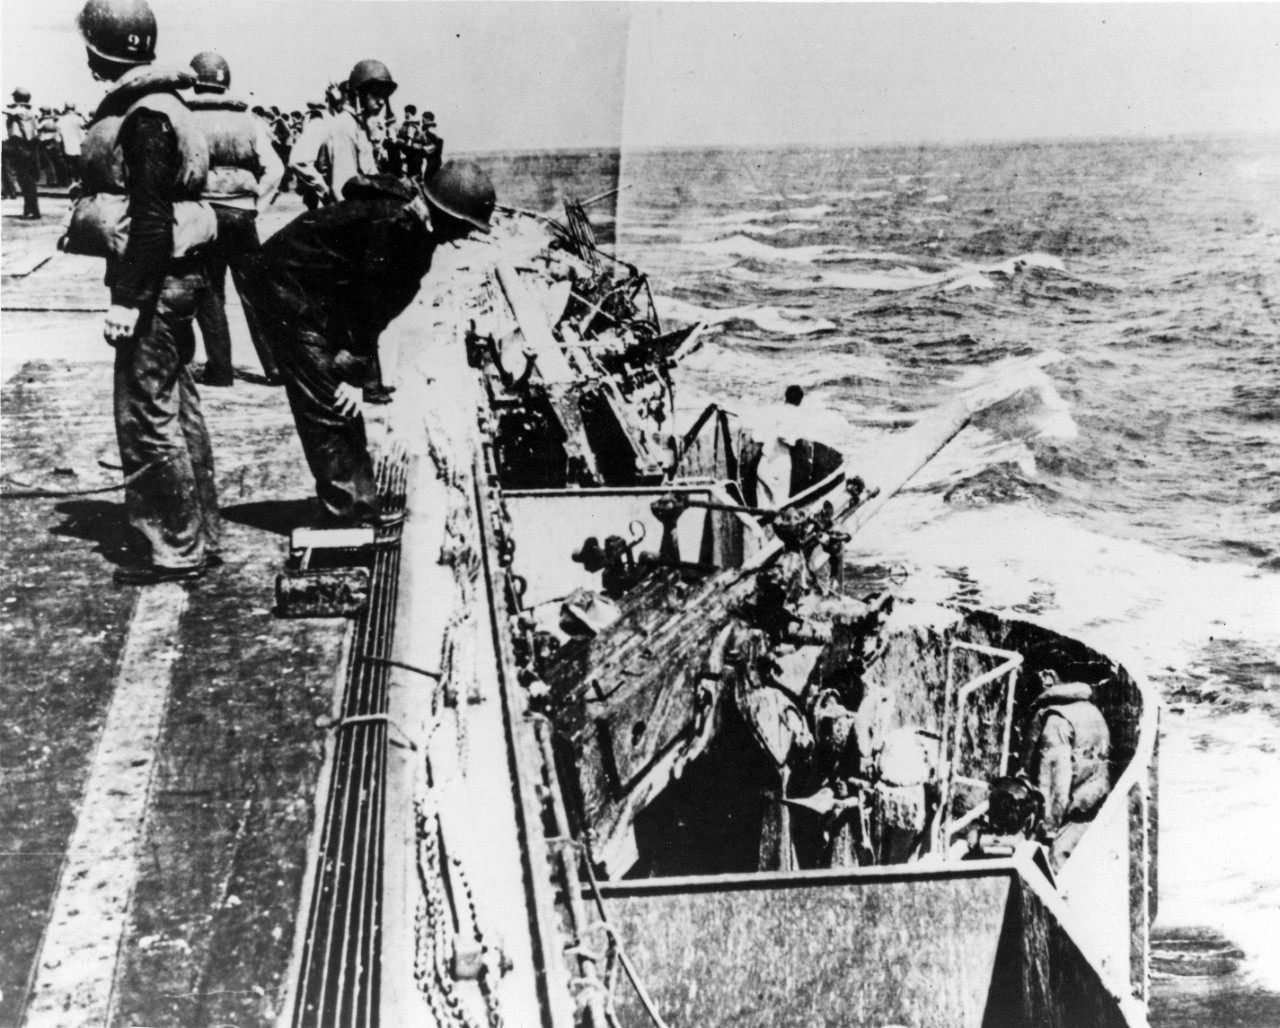 Photo #: 80-G-16807  Battle of the Coral Sea, May 1942